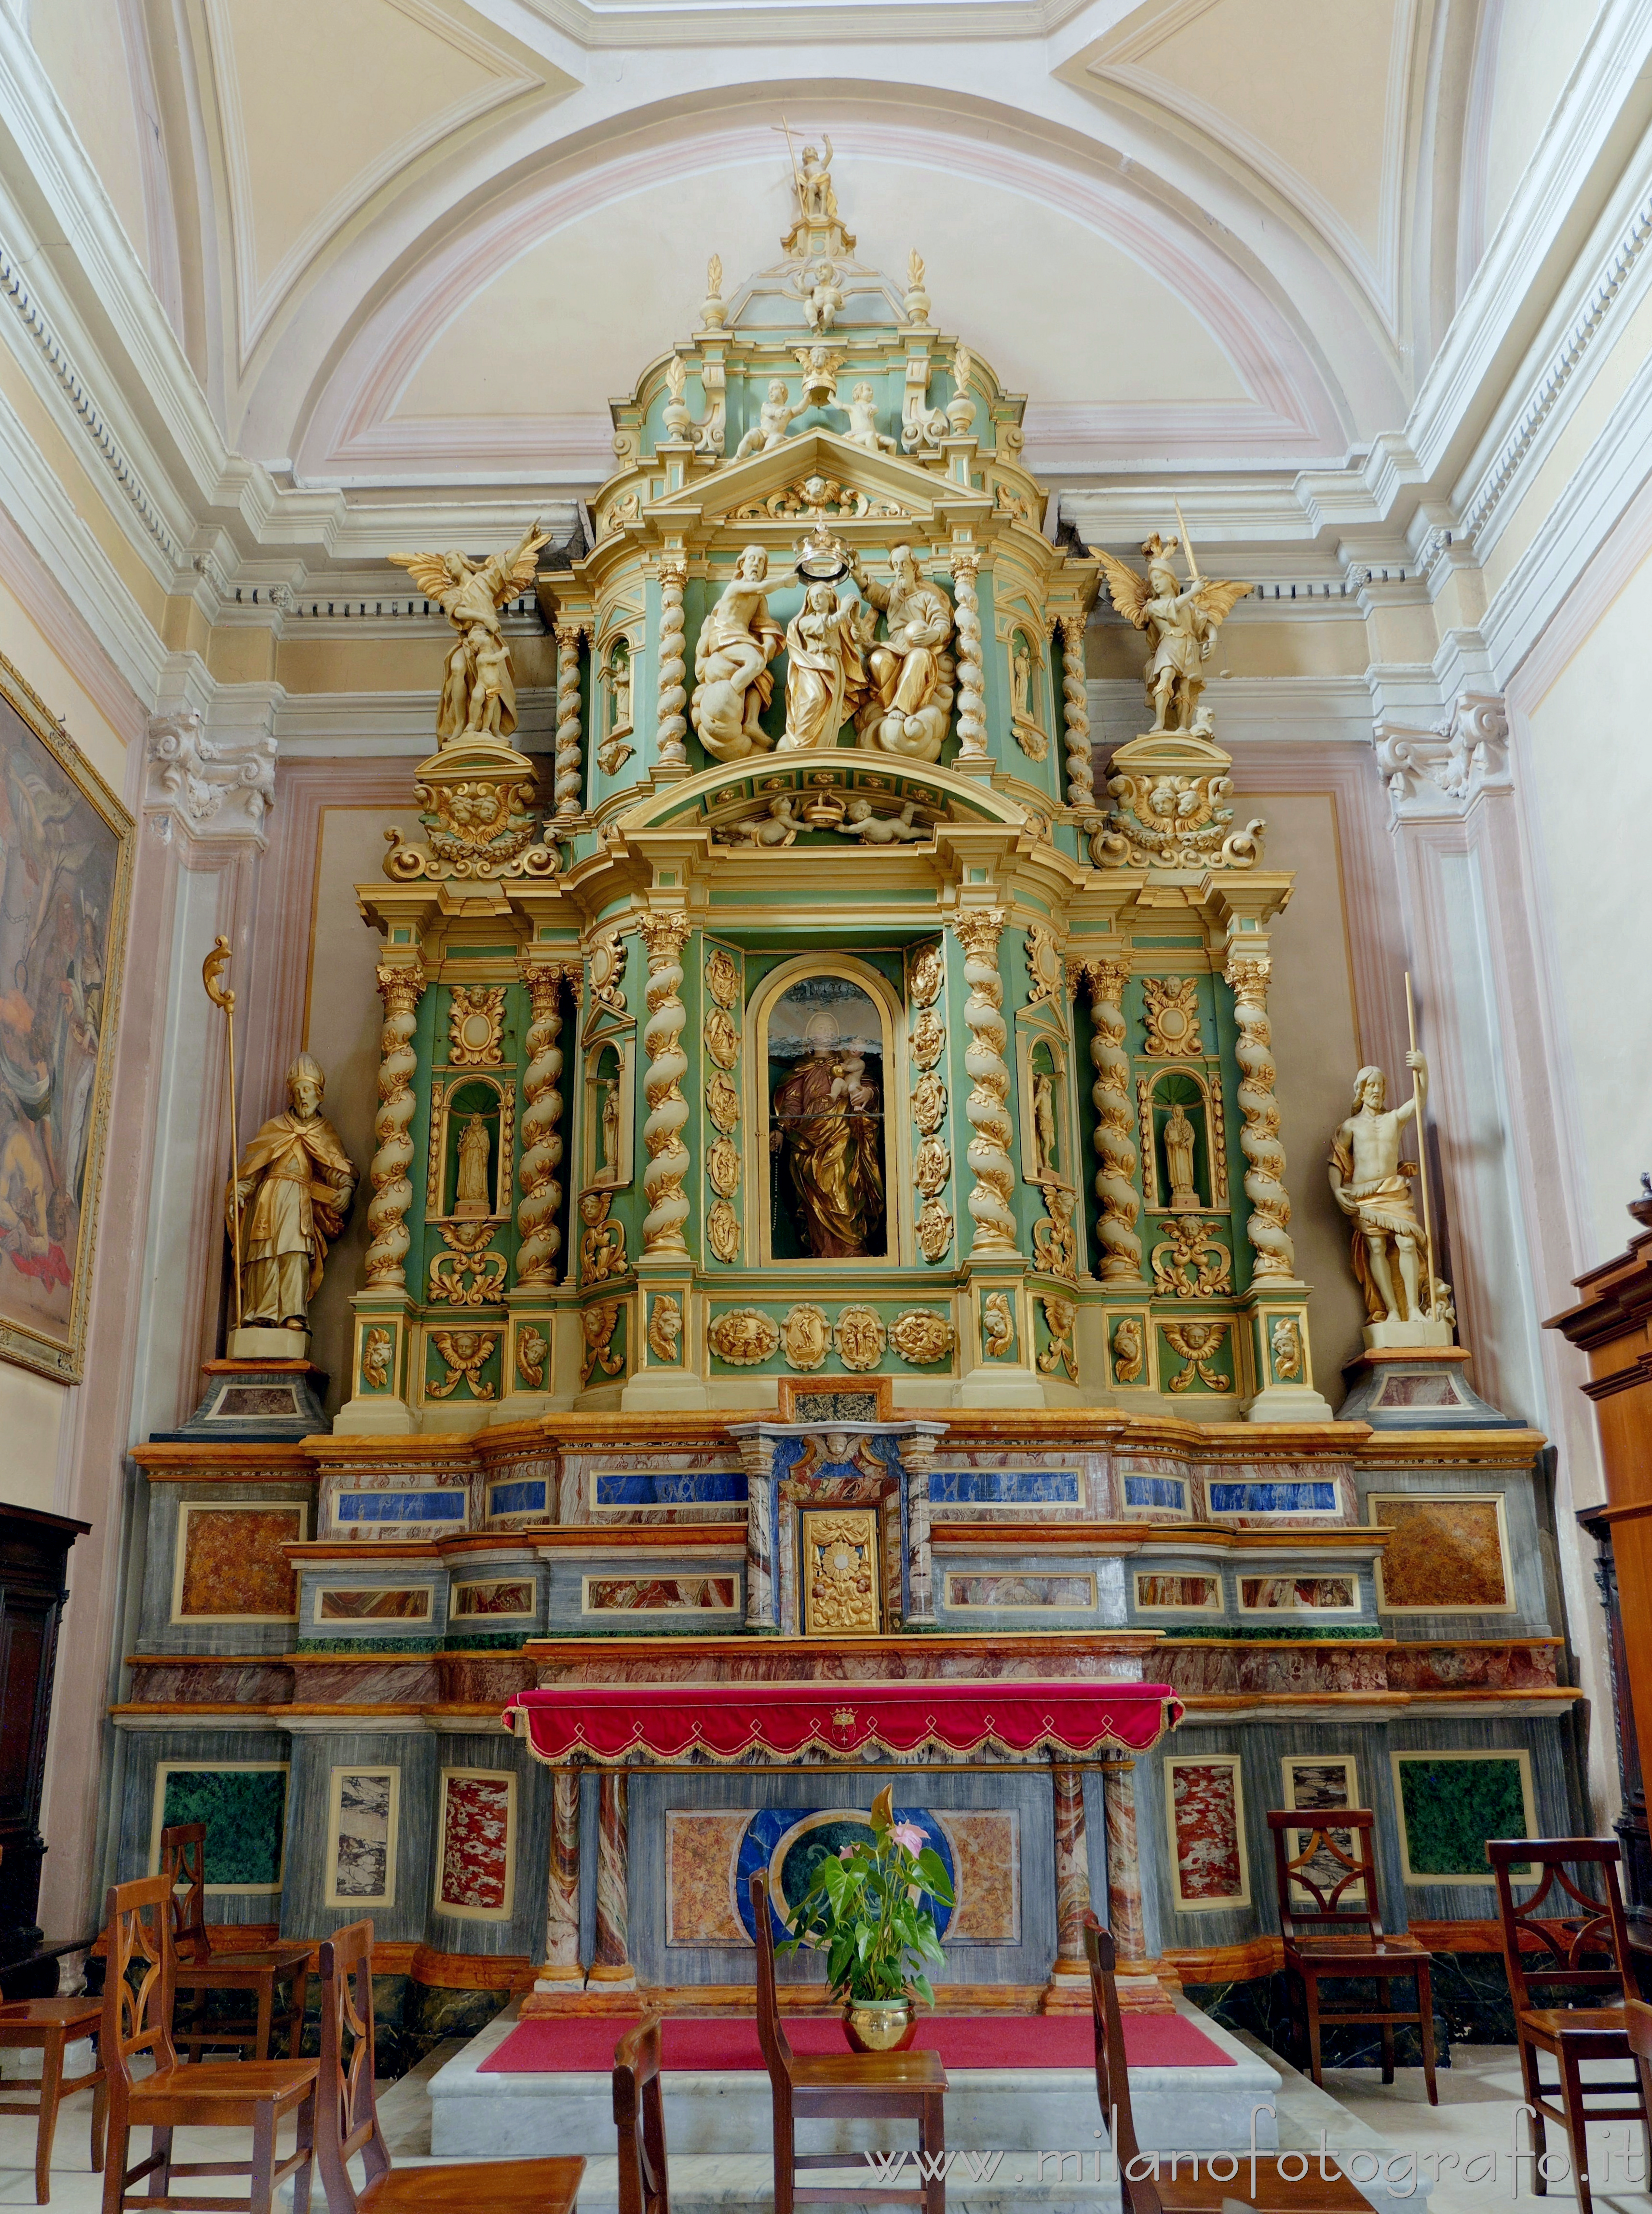 Ponderano (Biella, Italy): Altar of the Virgin of the Rosary in the Church of St. Lawrence Martyr - Ponderano (Biella, Italy)